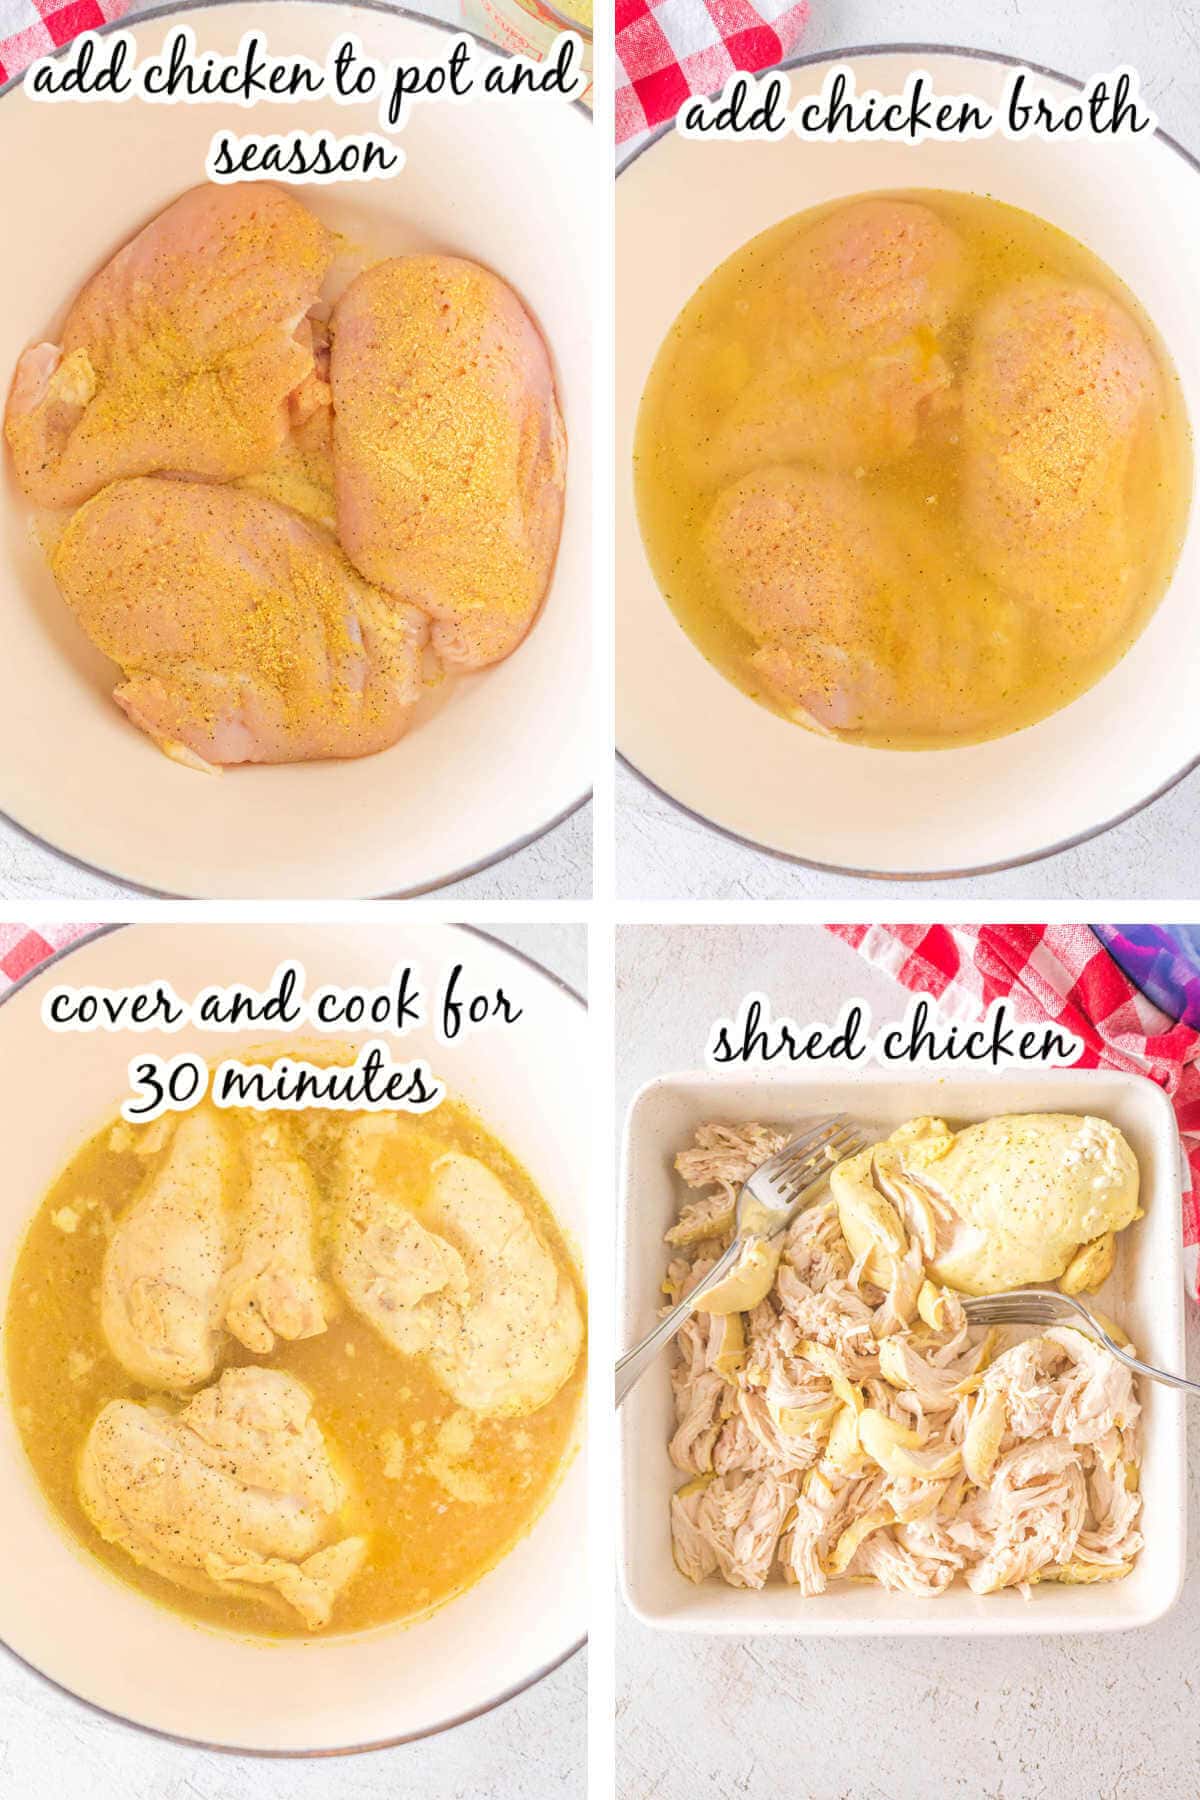 Instructions to make chicken recipe. With print overlay.